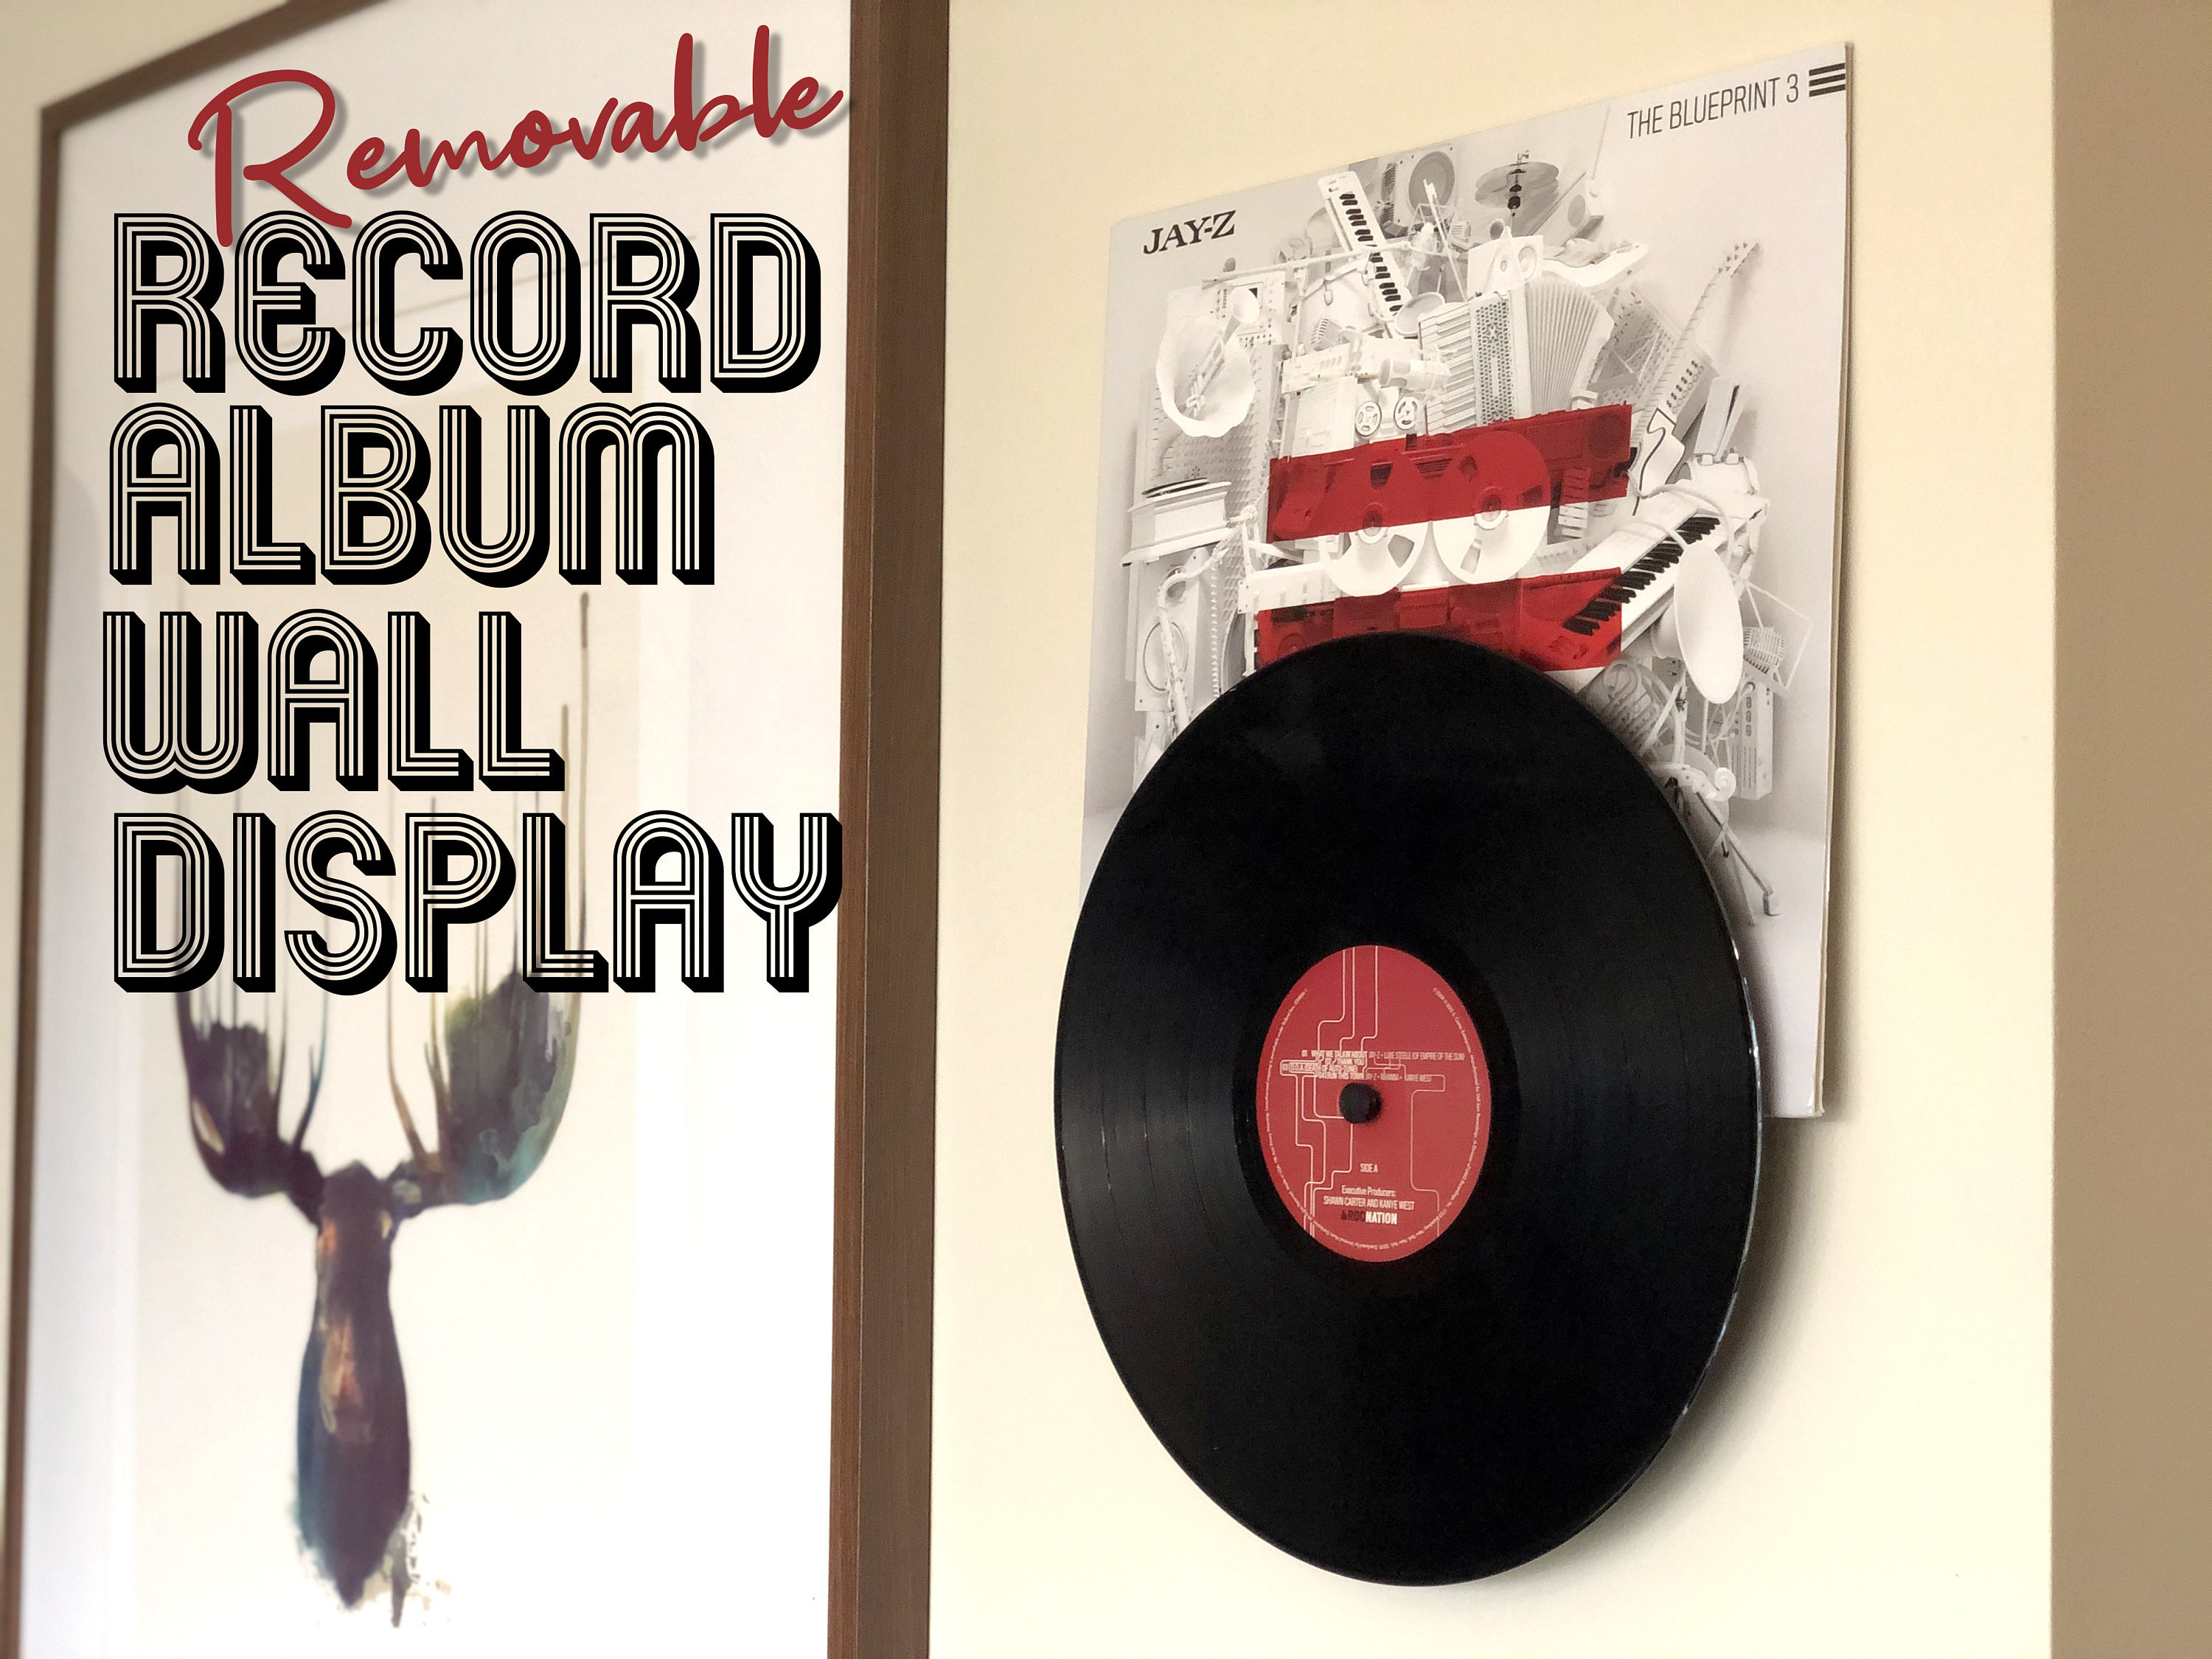 Vinyl Record Wall Display Mounts with Command Strips LPs Display Shelf  Shelves